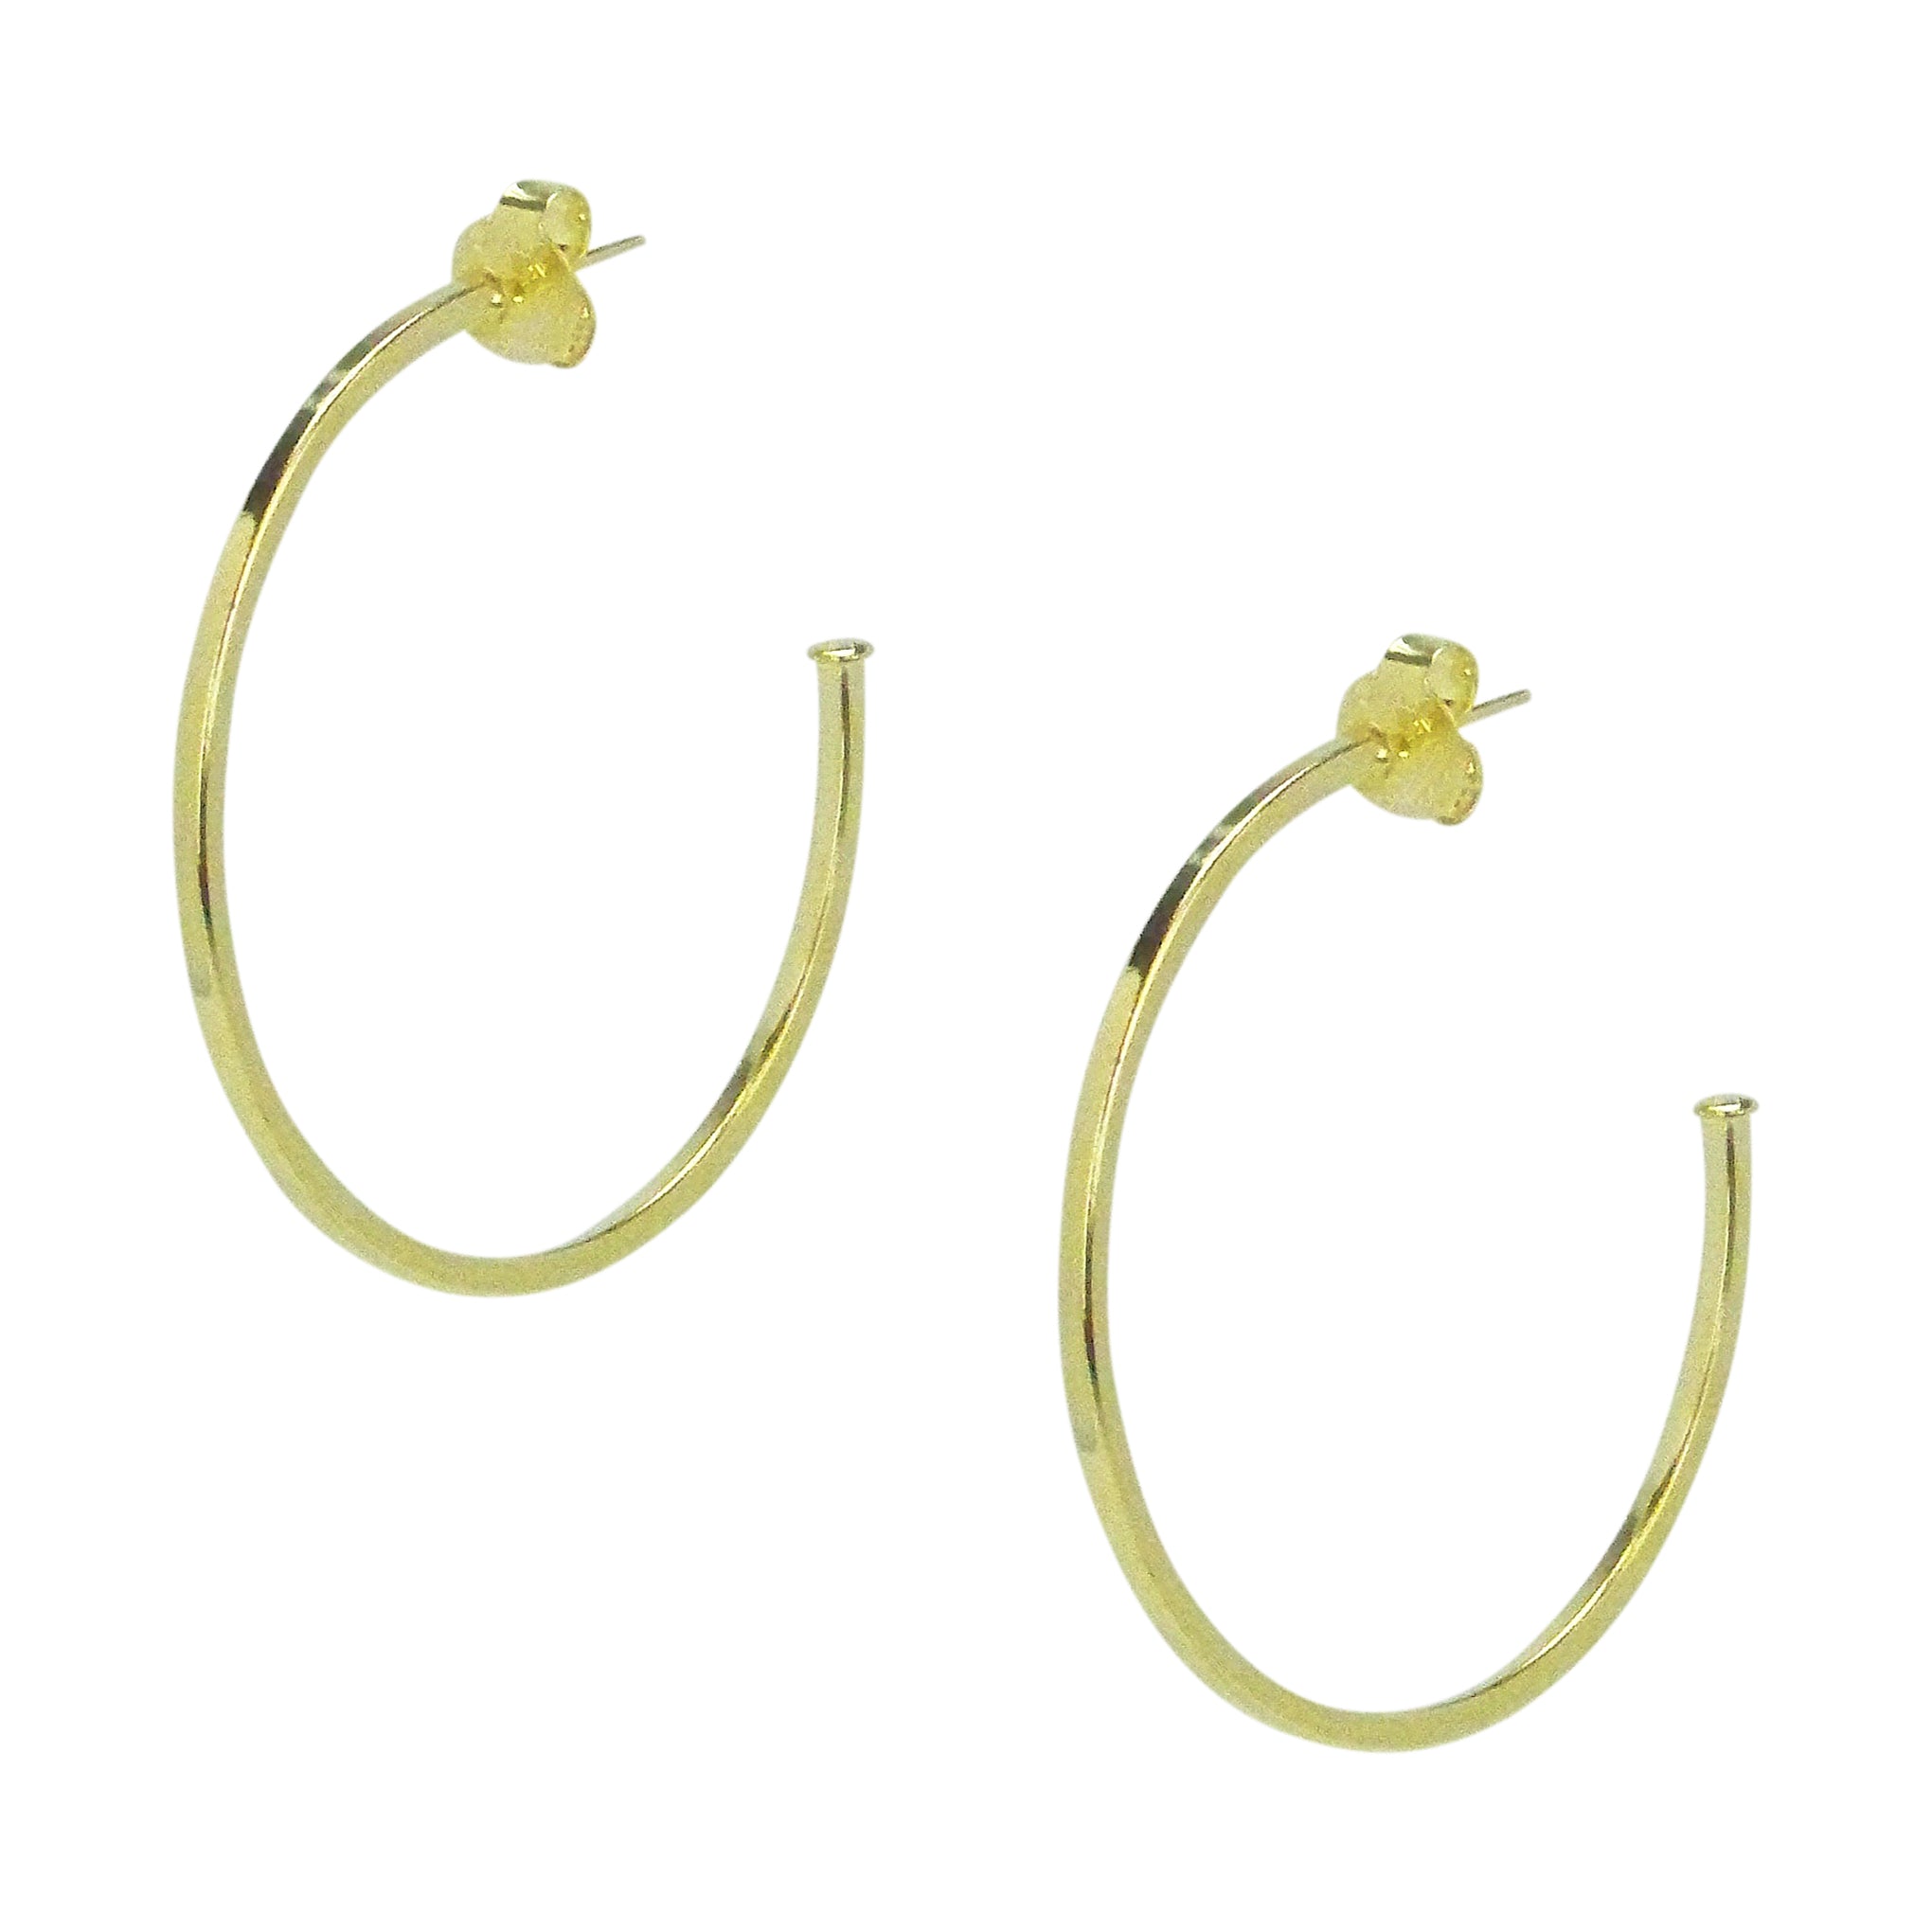 image of Sheila Fajl Perfect Hoop Earrings in Polished Gold Plated